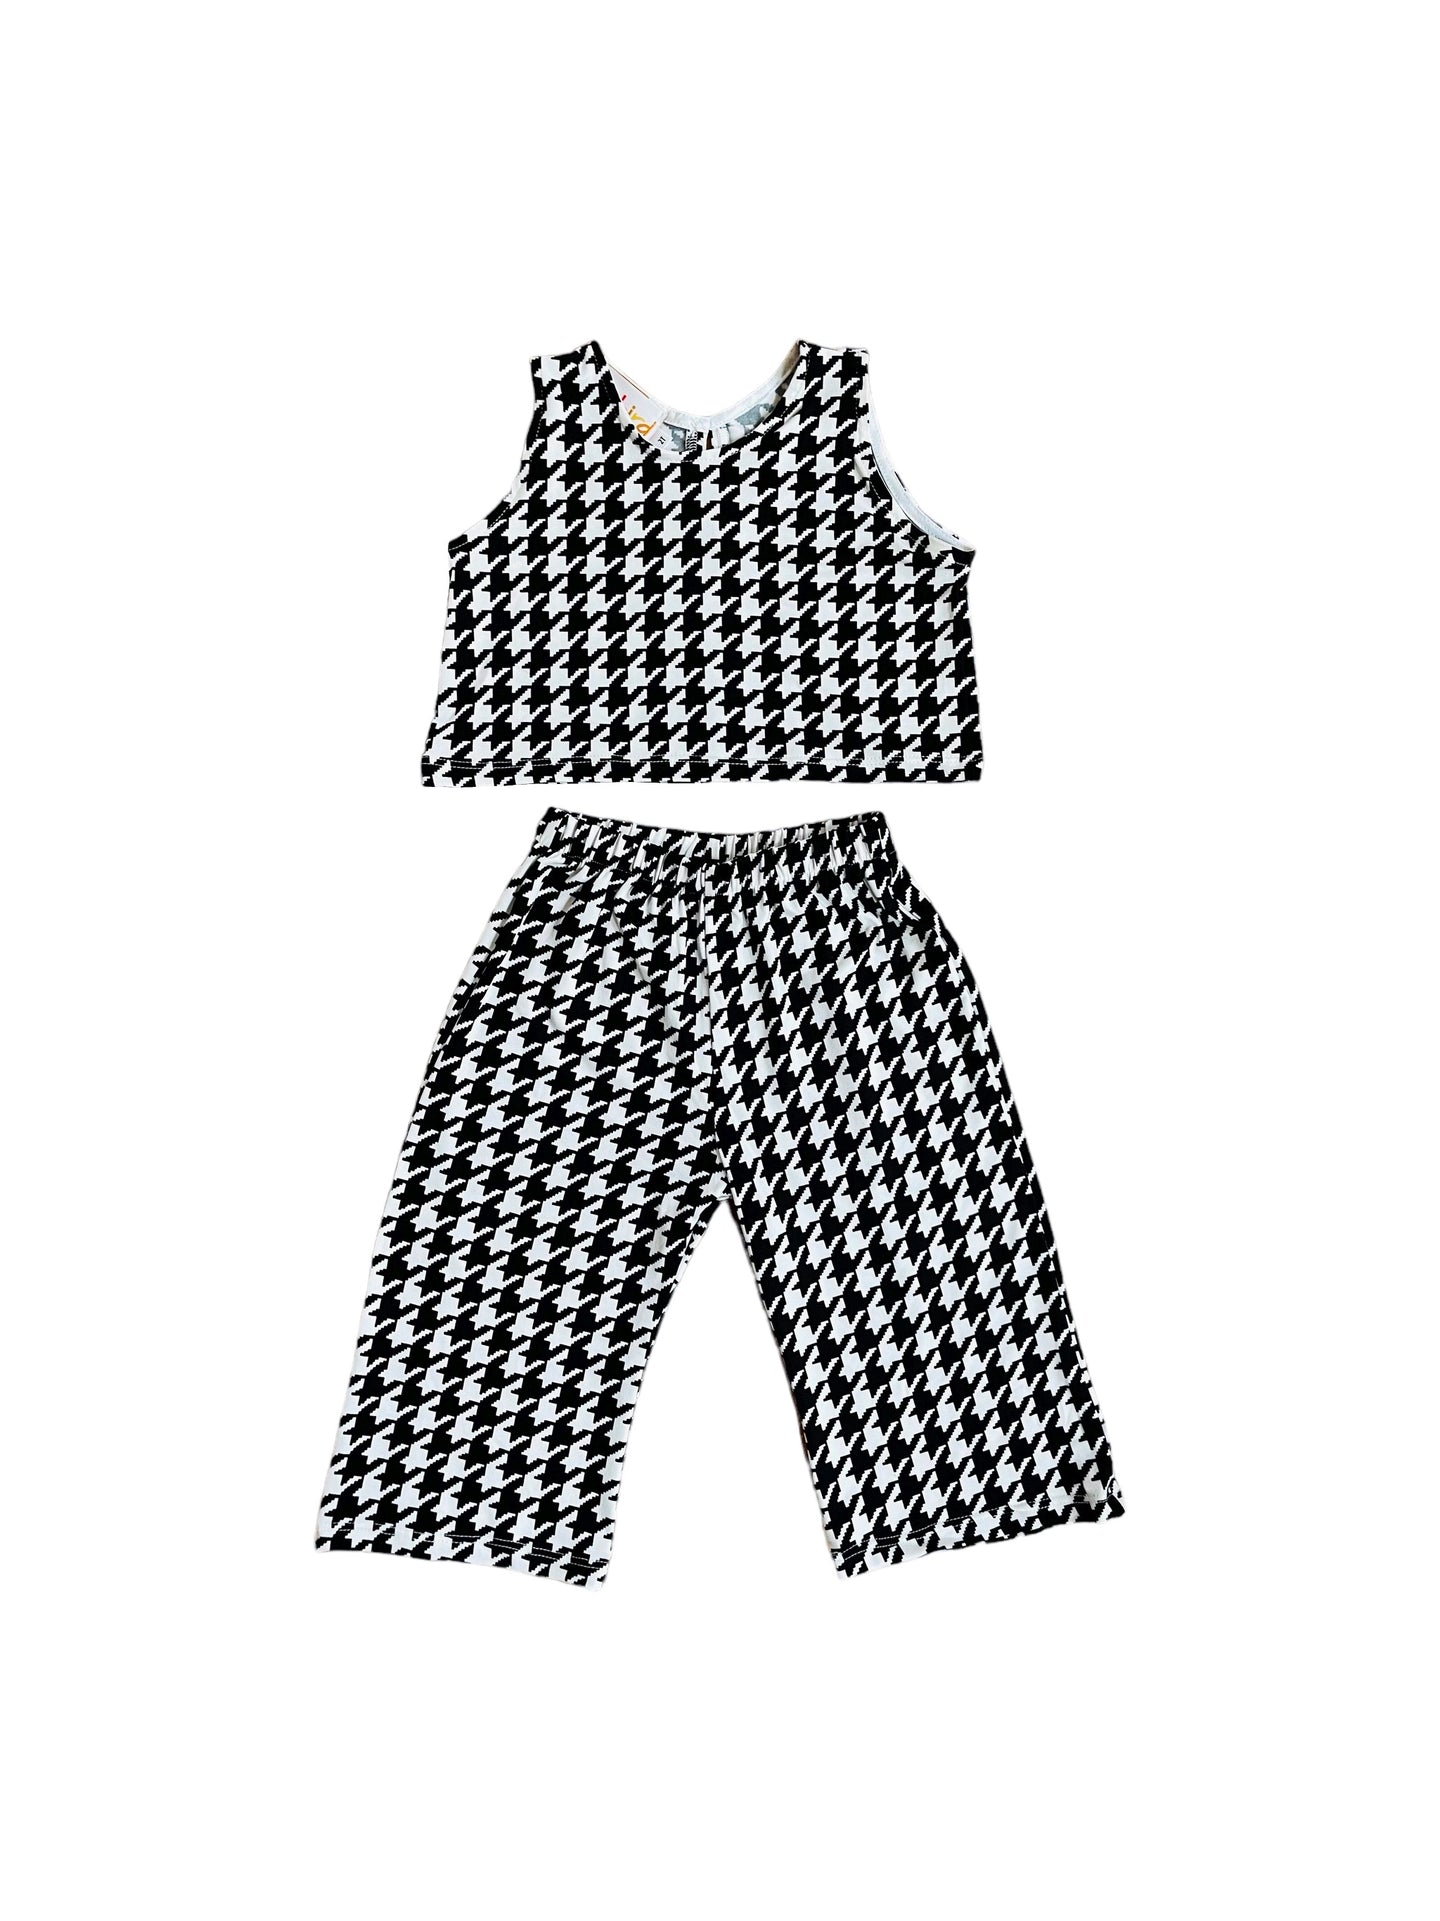 kids houndstooth clothes